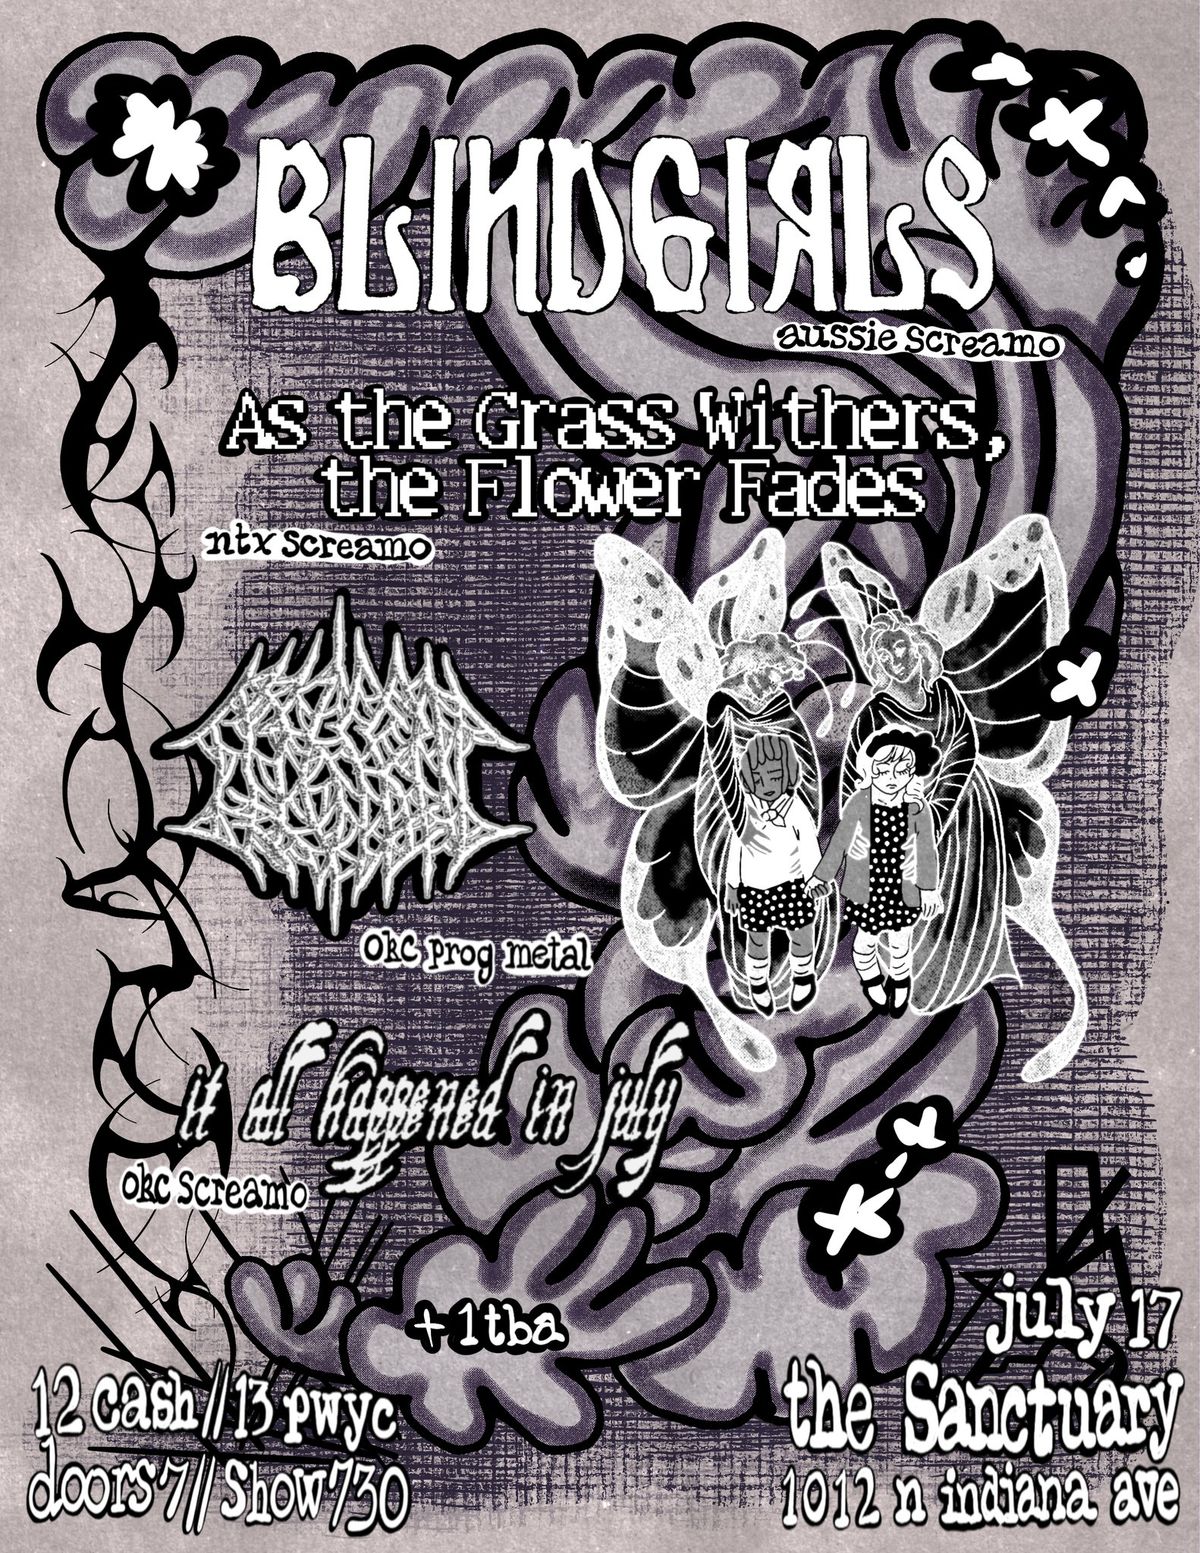 BLINDGIRLS, AS THE GRASS WITHERS, THE FLOWER FADES, DISCERN, IT ALL HAPPENED IN JULY, +1 TBA